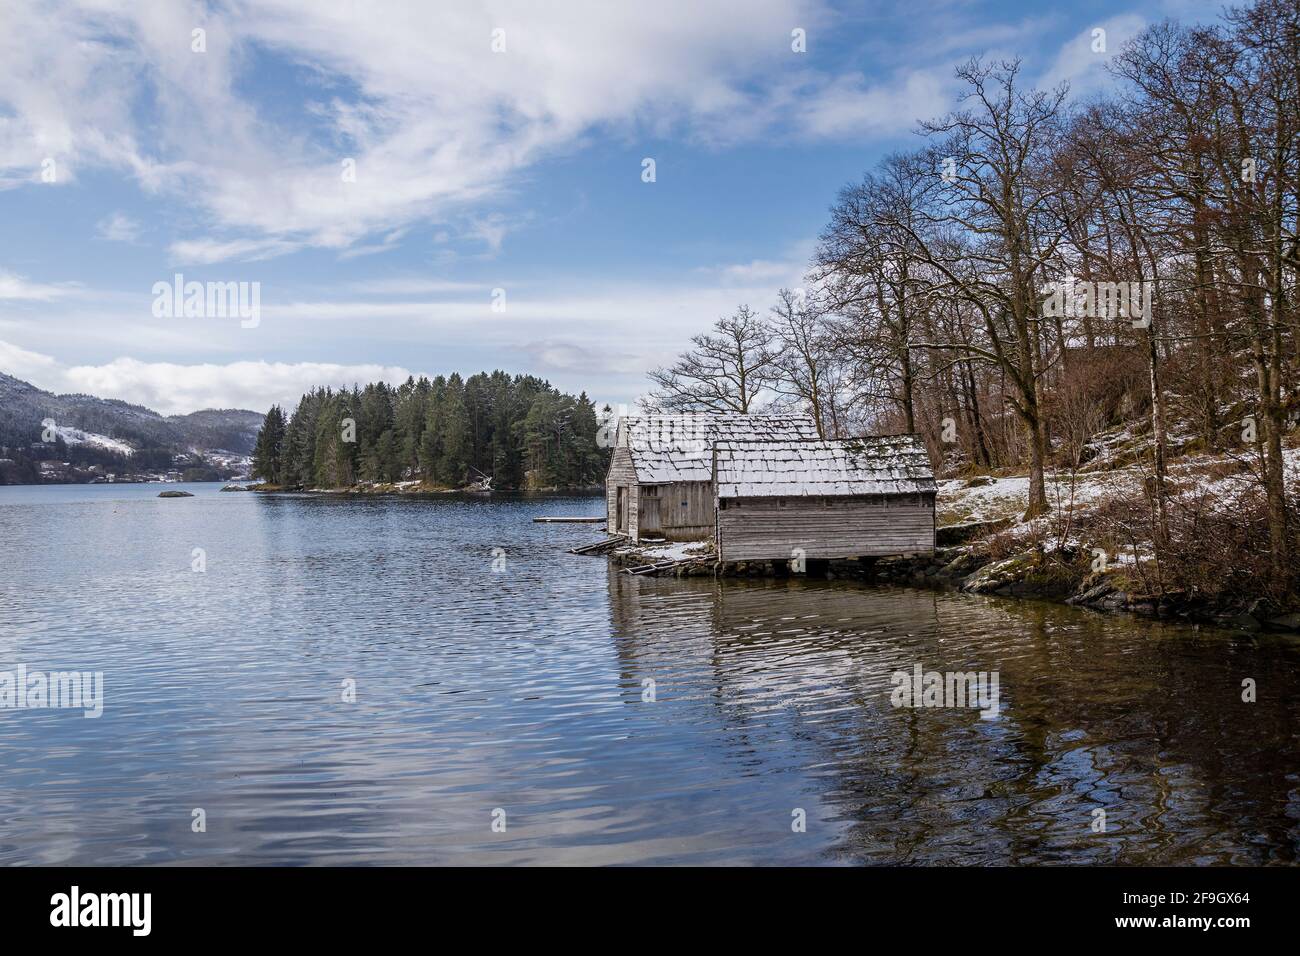 From Hordamuseet open air museum at Stend, by the Fana fjord, Norway. Late winter. Boathouses, old building styles from Hordaland and west coast Norwa Stock Photo